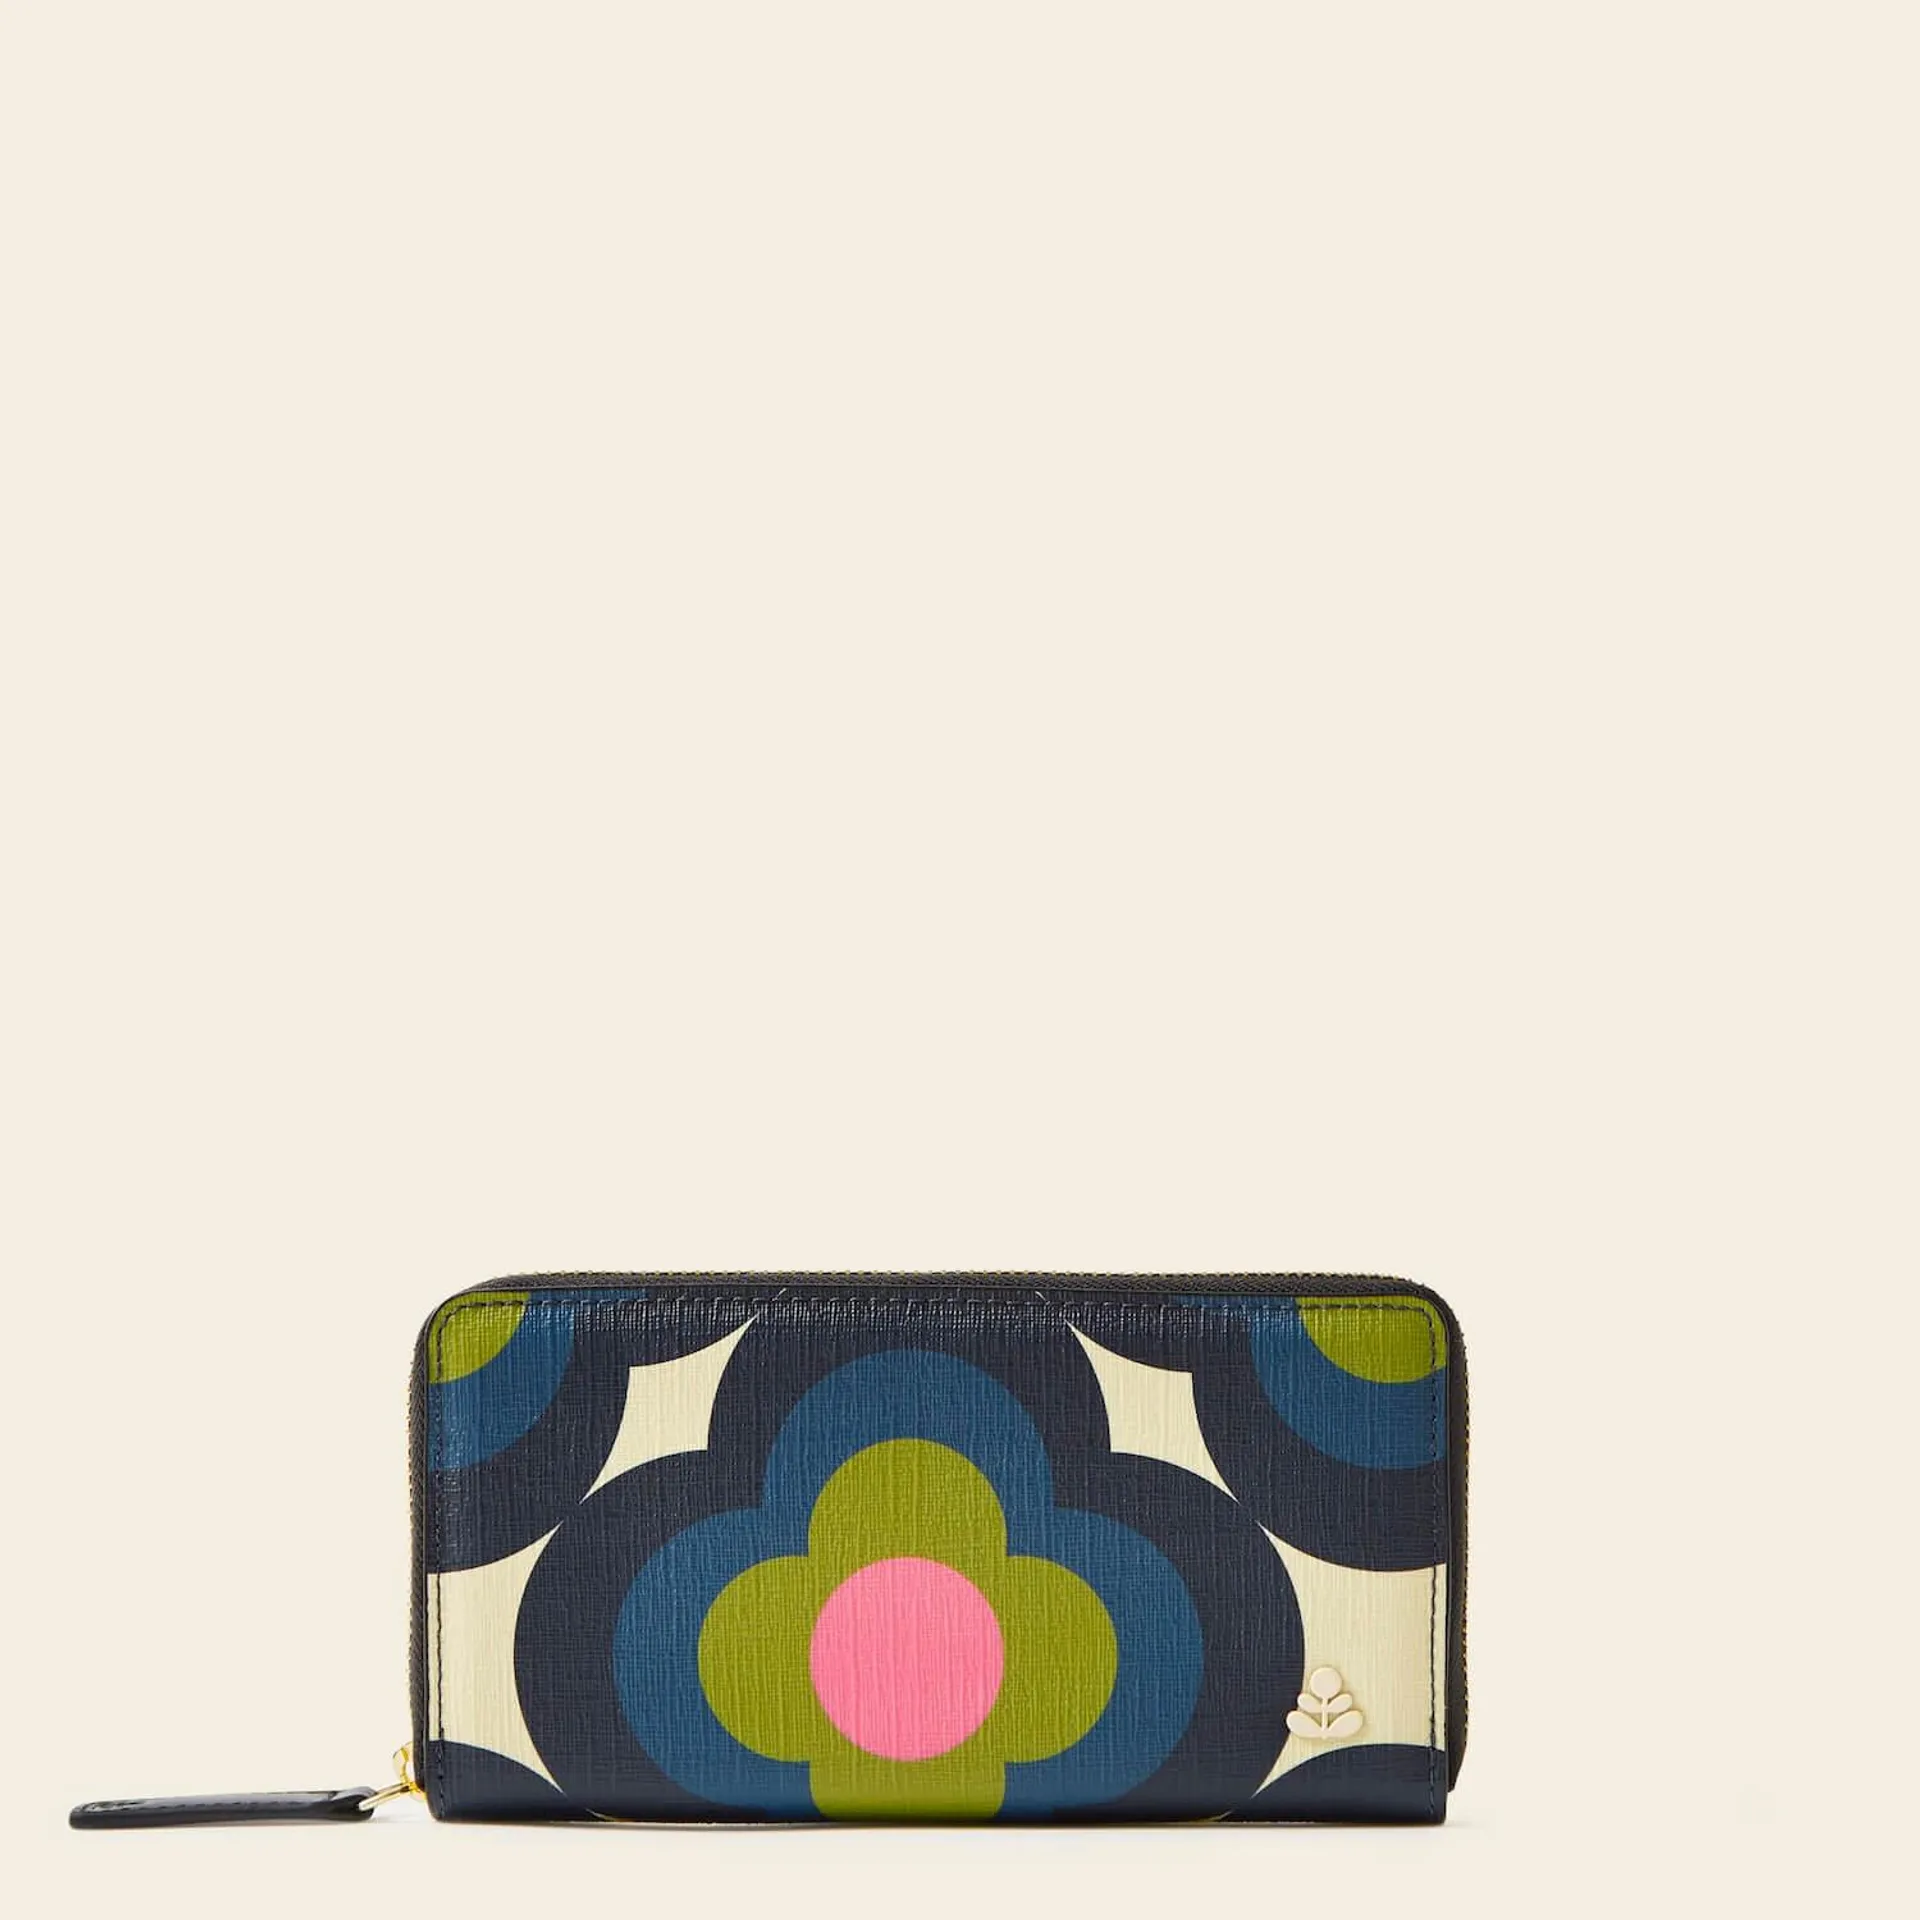 Forget Me Not Wallet in Radial Flower Rockpool